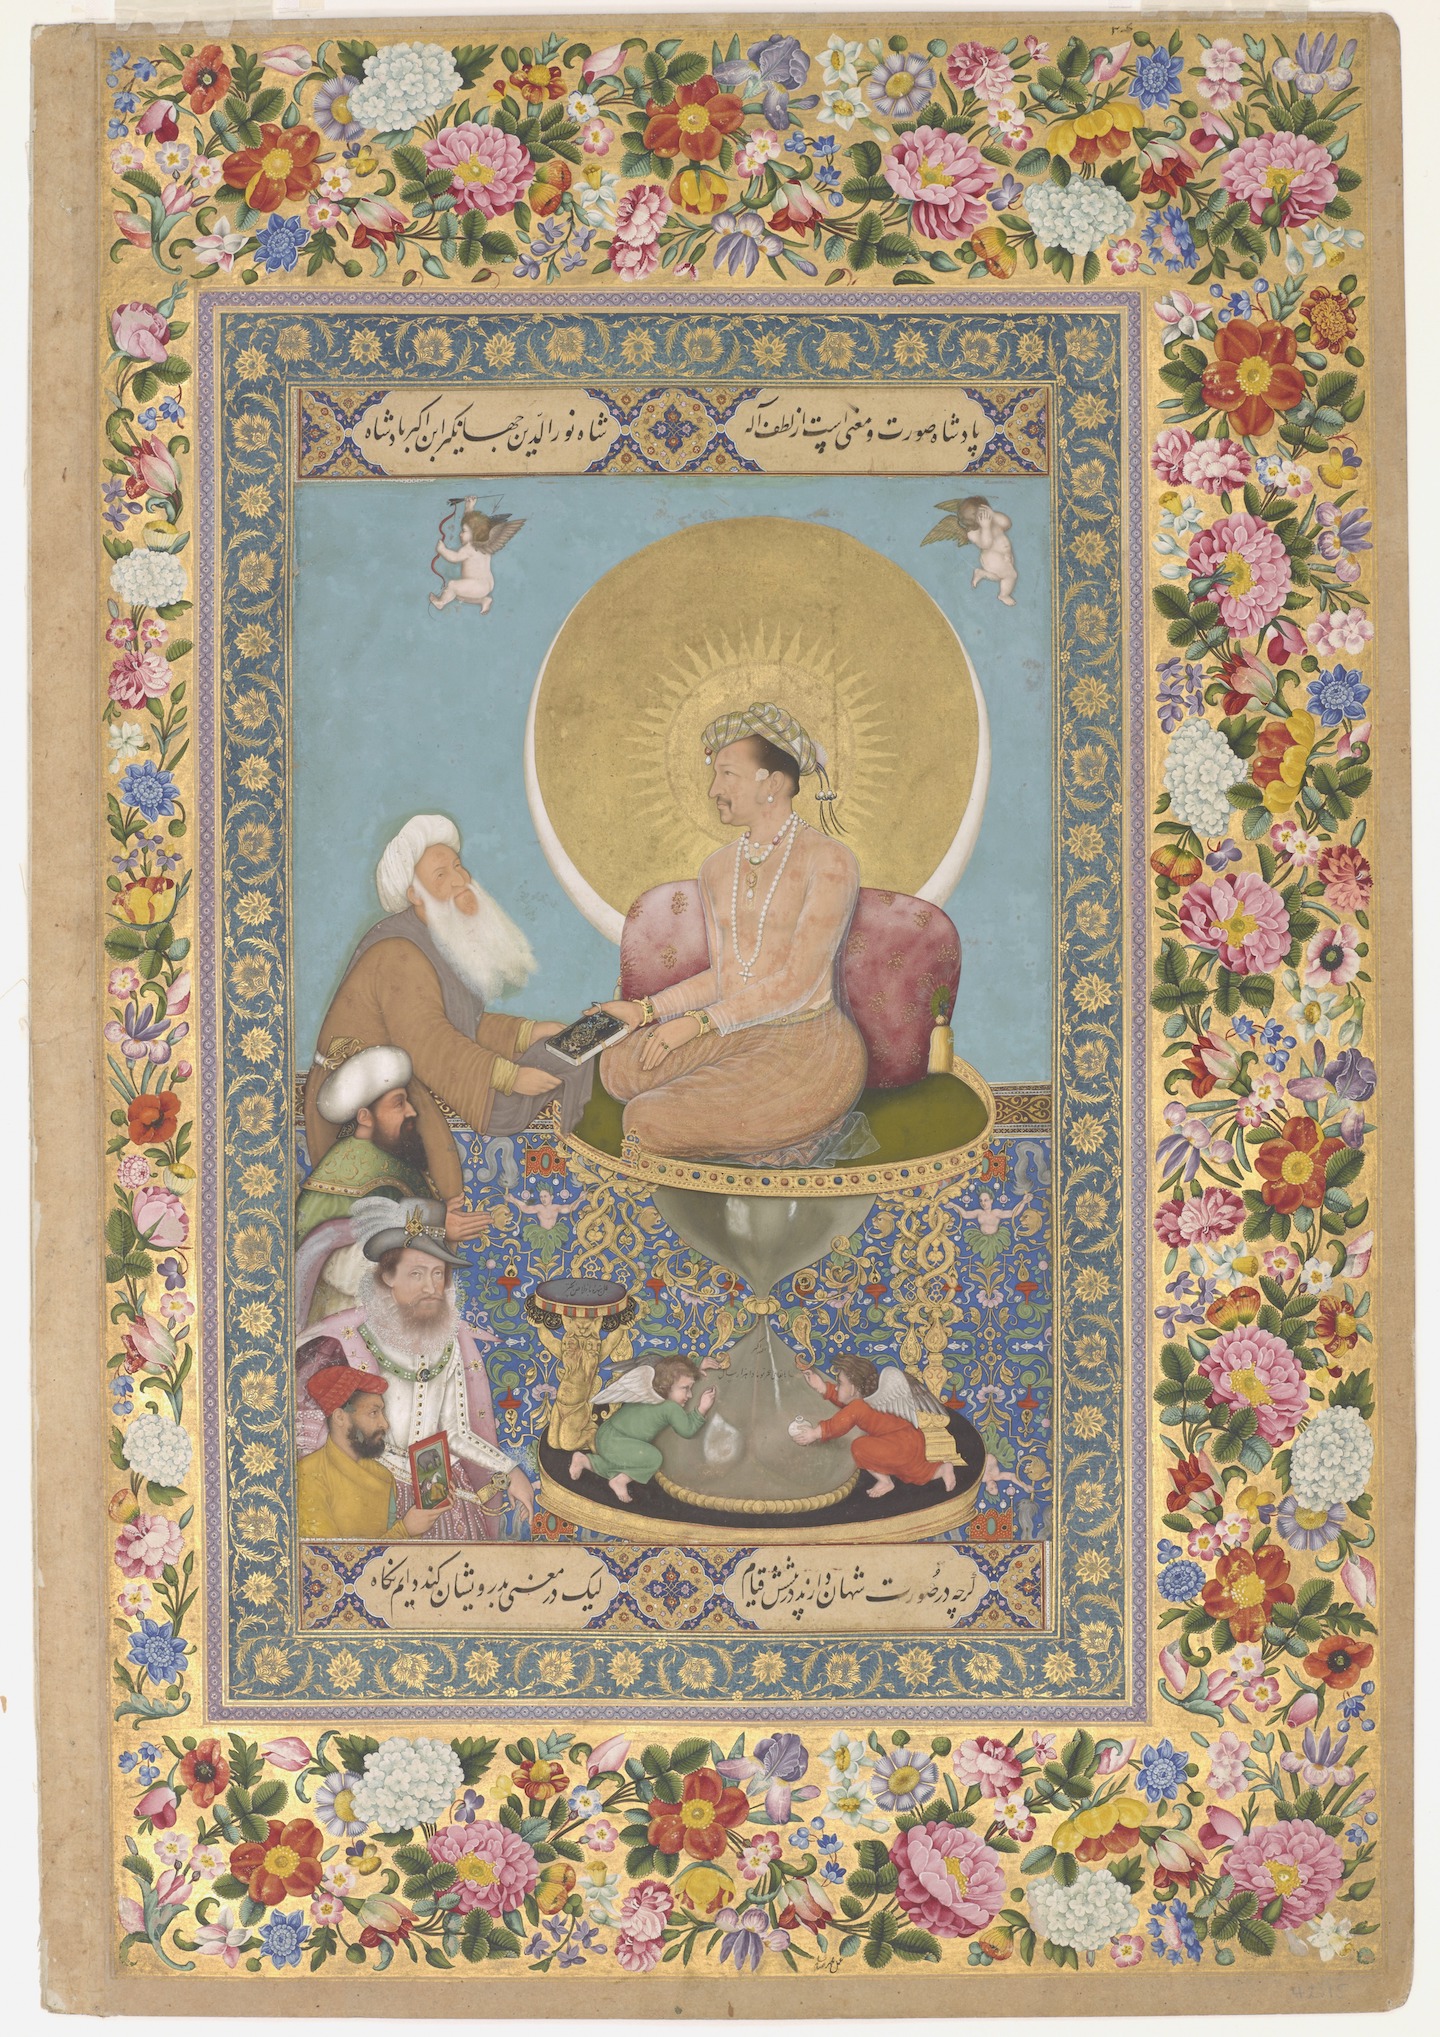 Bichitr, margins by Muhammad Sadiq, Jahangir Preferring a Sufi Shaikh to Kings from the "St. Petersburg Album," 1615–18, opaque watercolor, gold and ink on paper, 46.9 × 30.7 cm (Freer|Sackler: The Smithsonian's Museums of Asian Art, Washington, DC)